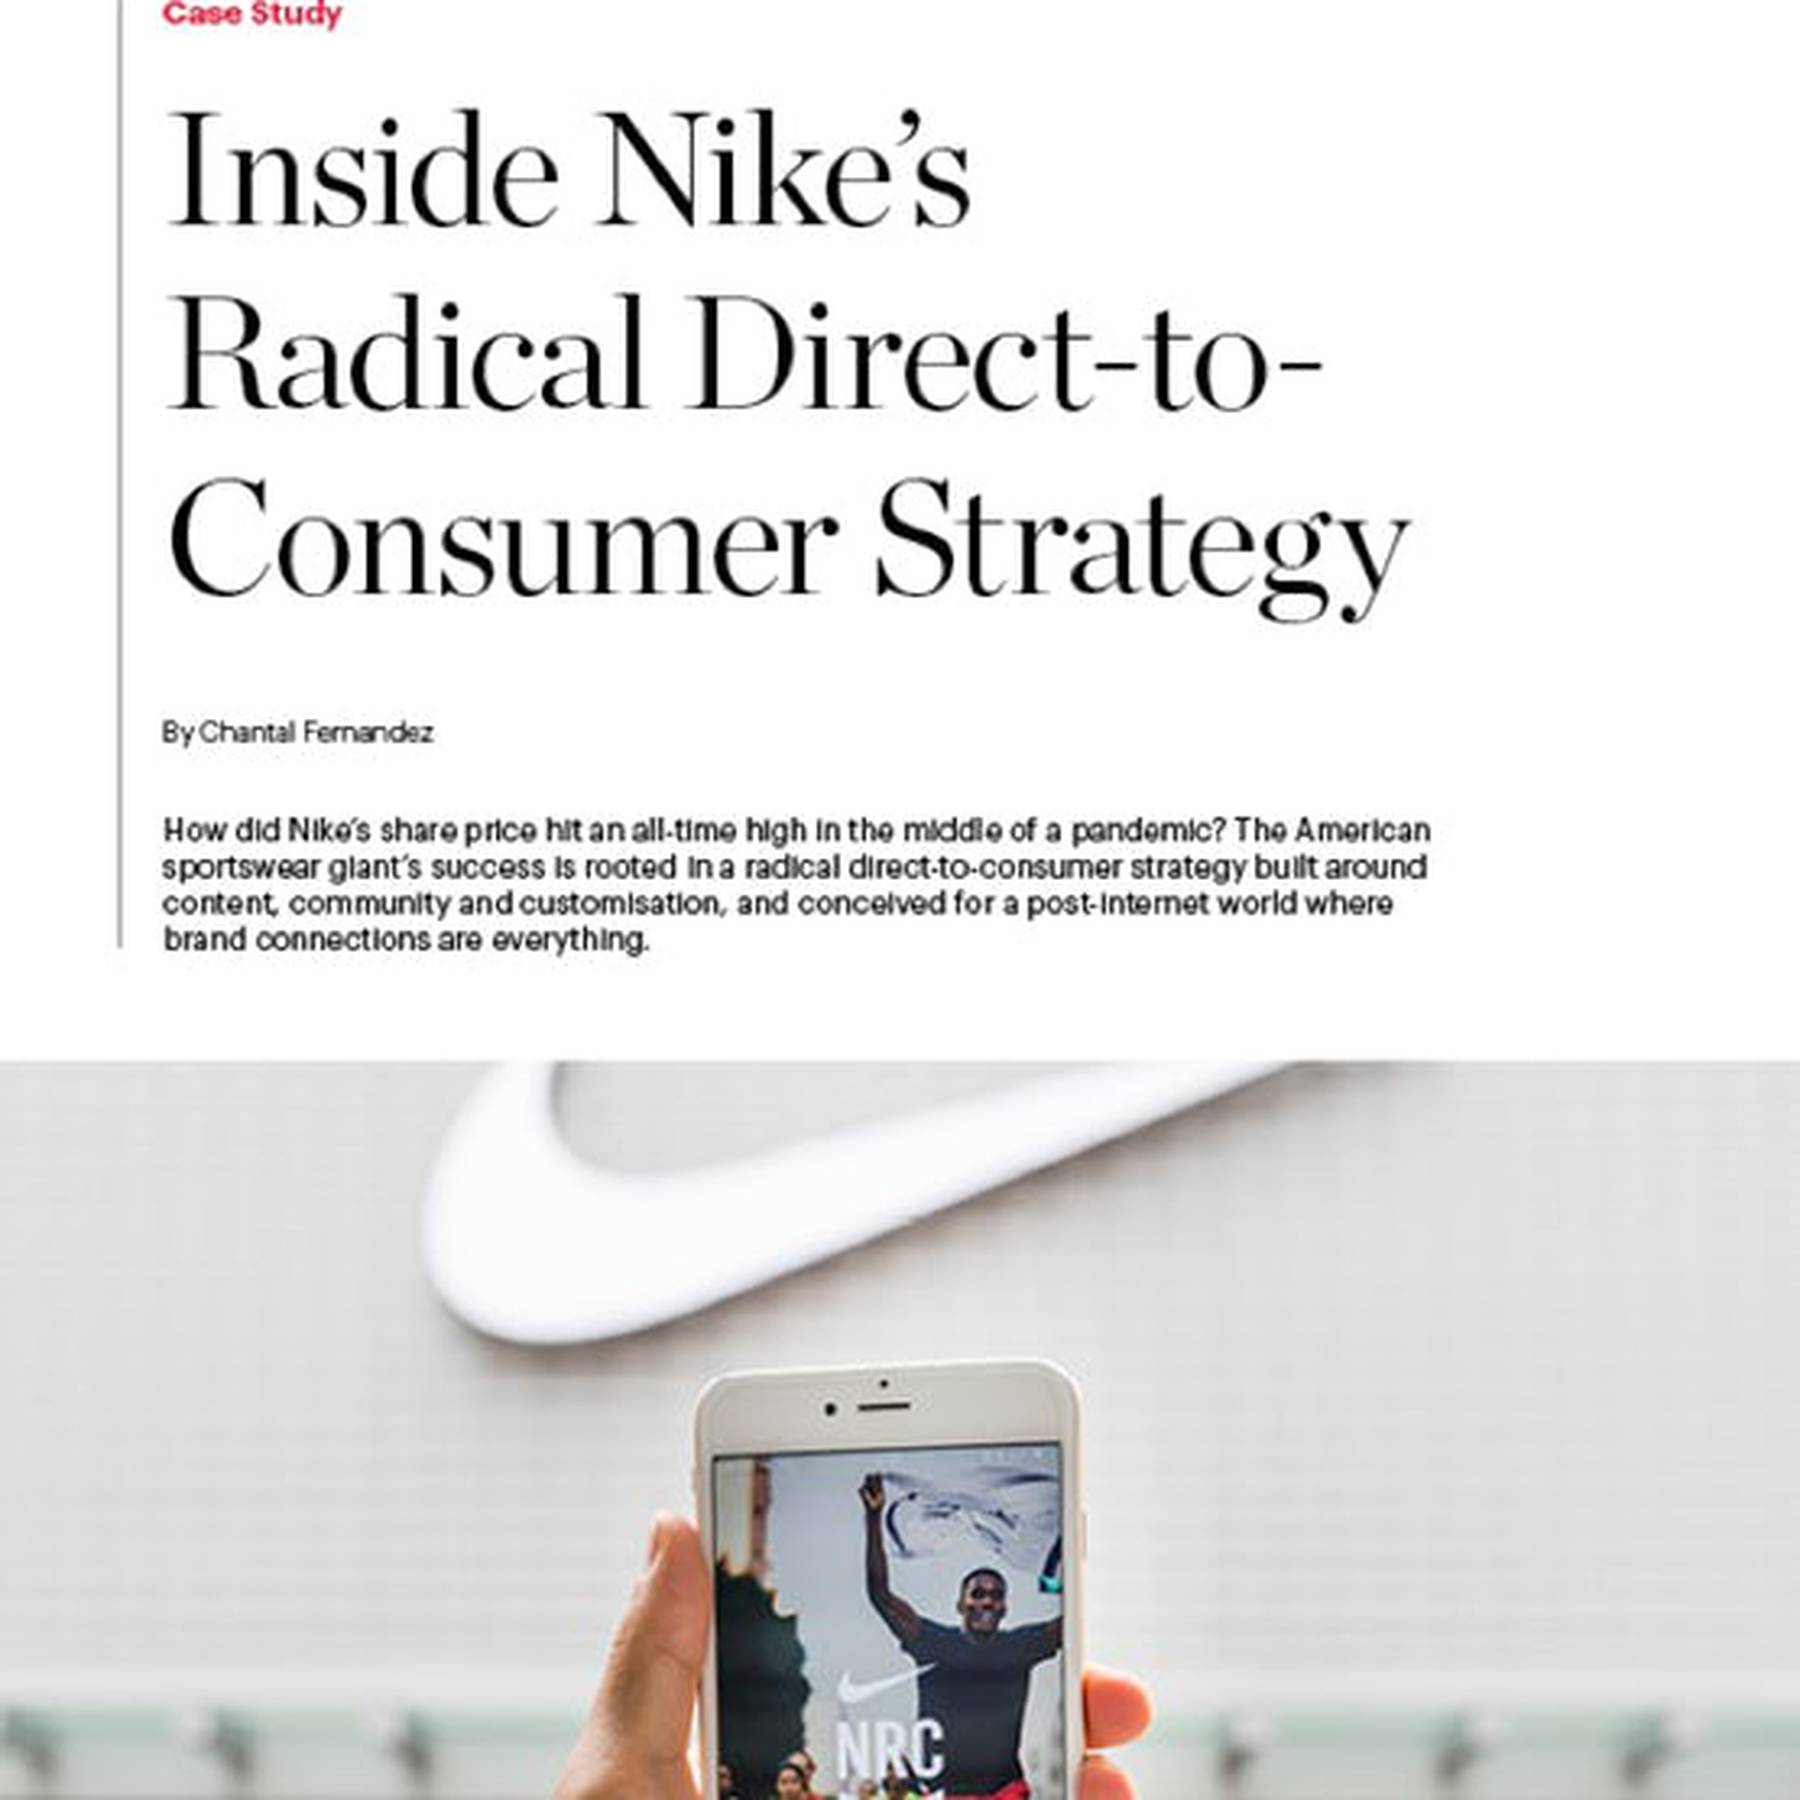 Inside Nike's Radical Direct-to-Consumer — Download the Case Study BoF